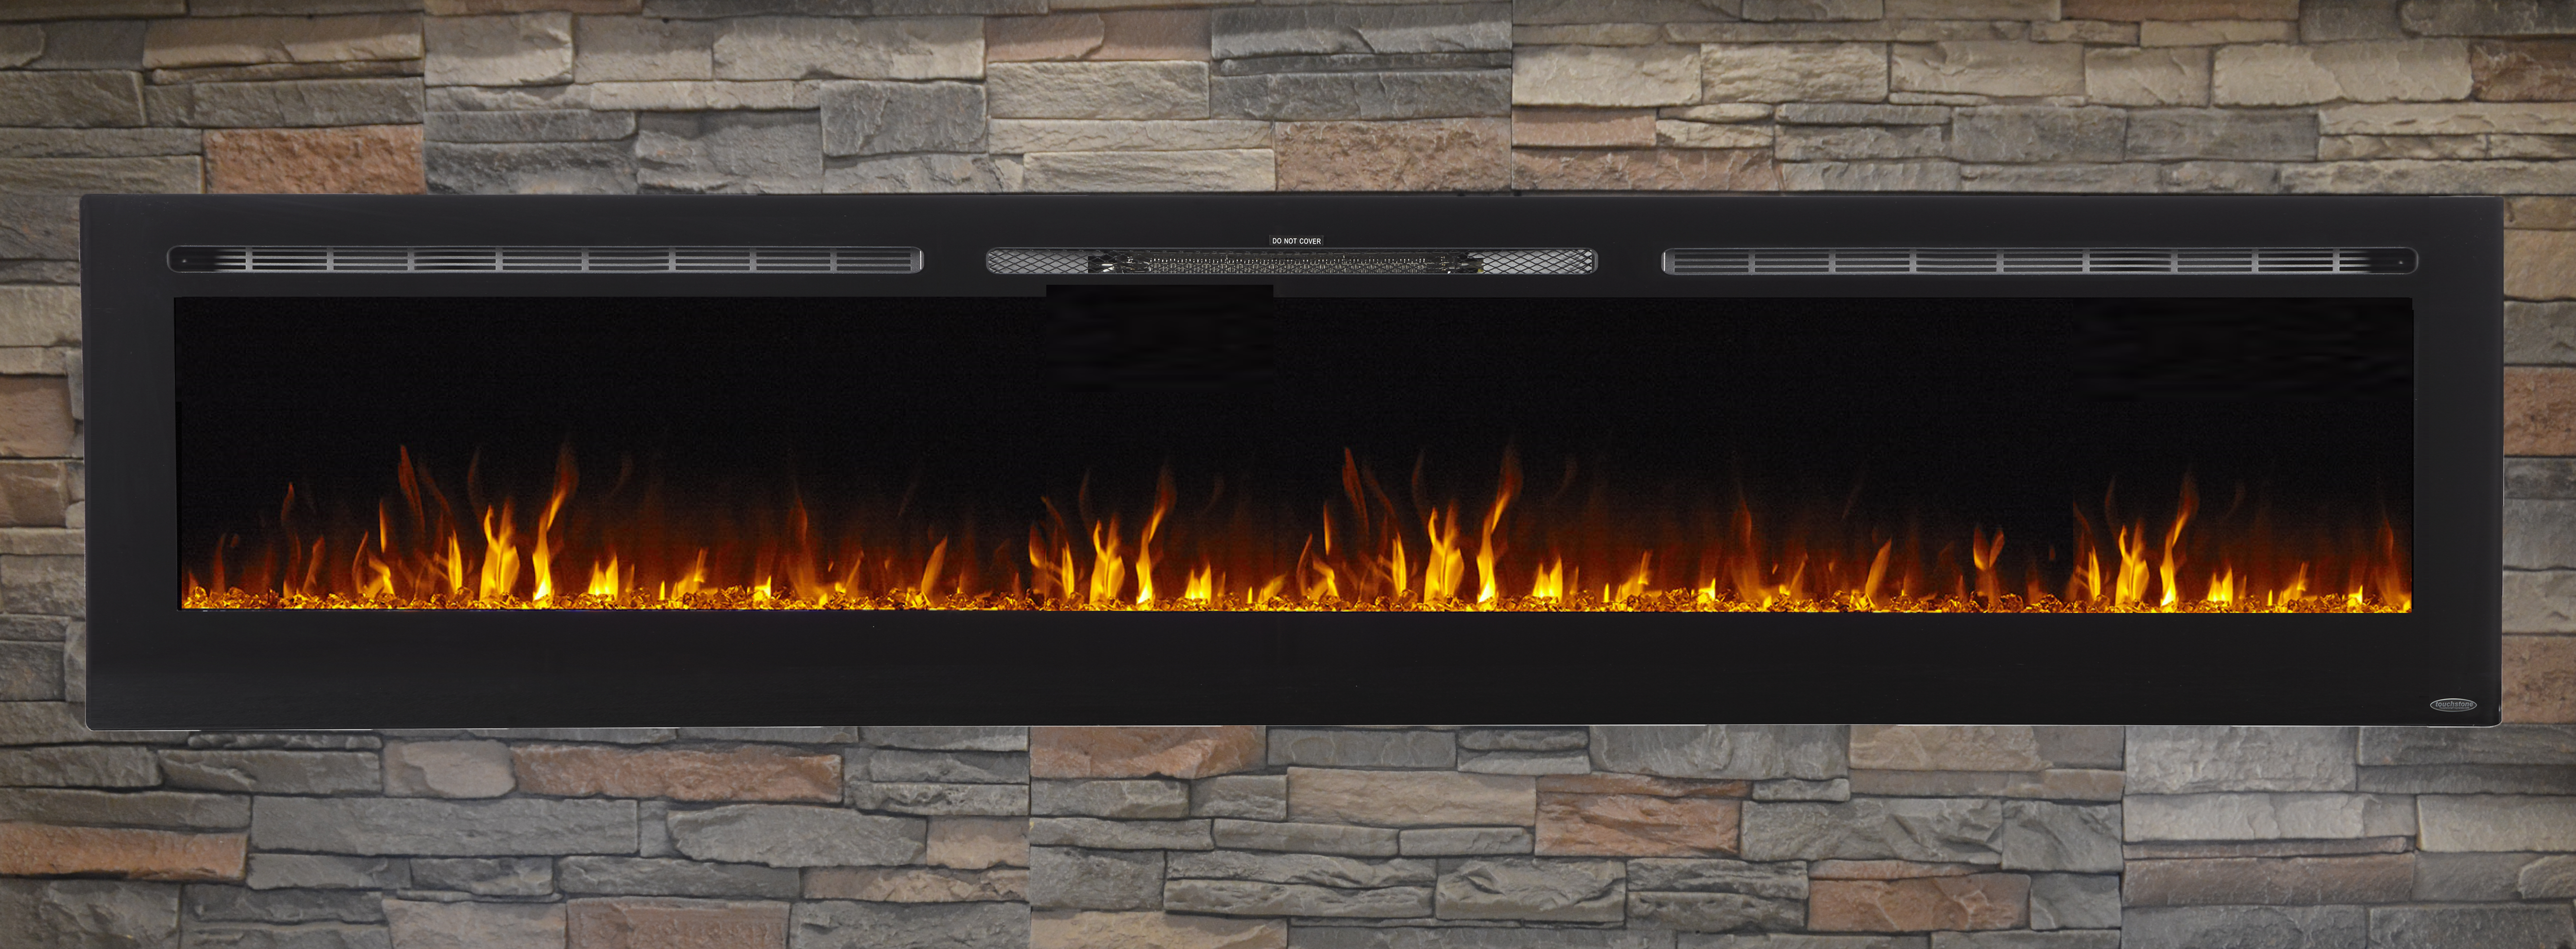 Sideline 100 80032  Refurbished Recessed Electric Fireplace brick wall.